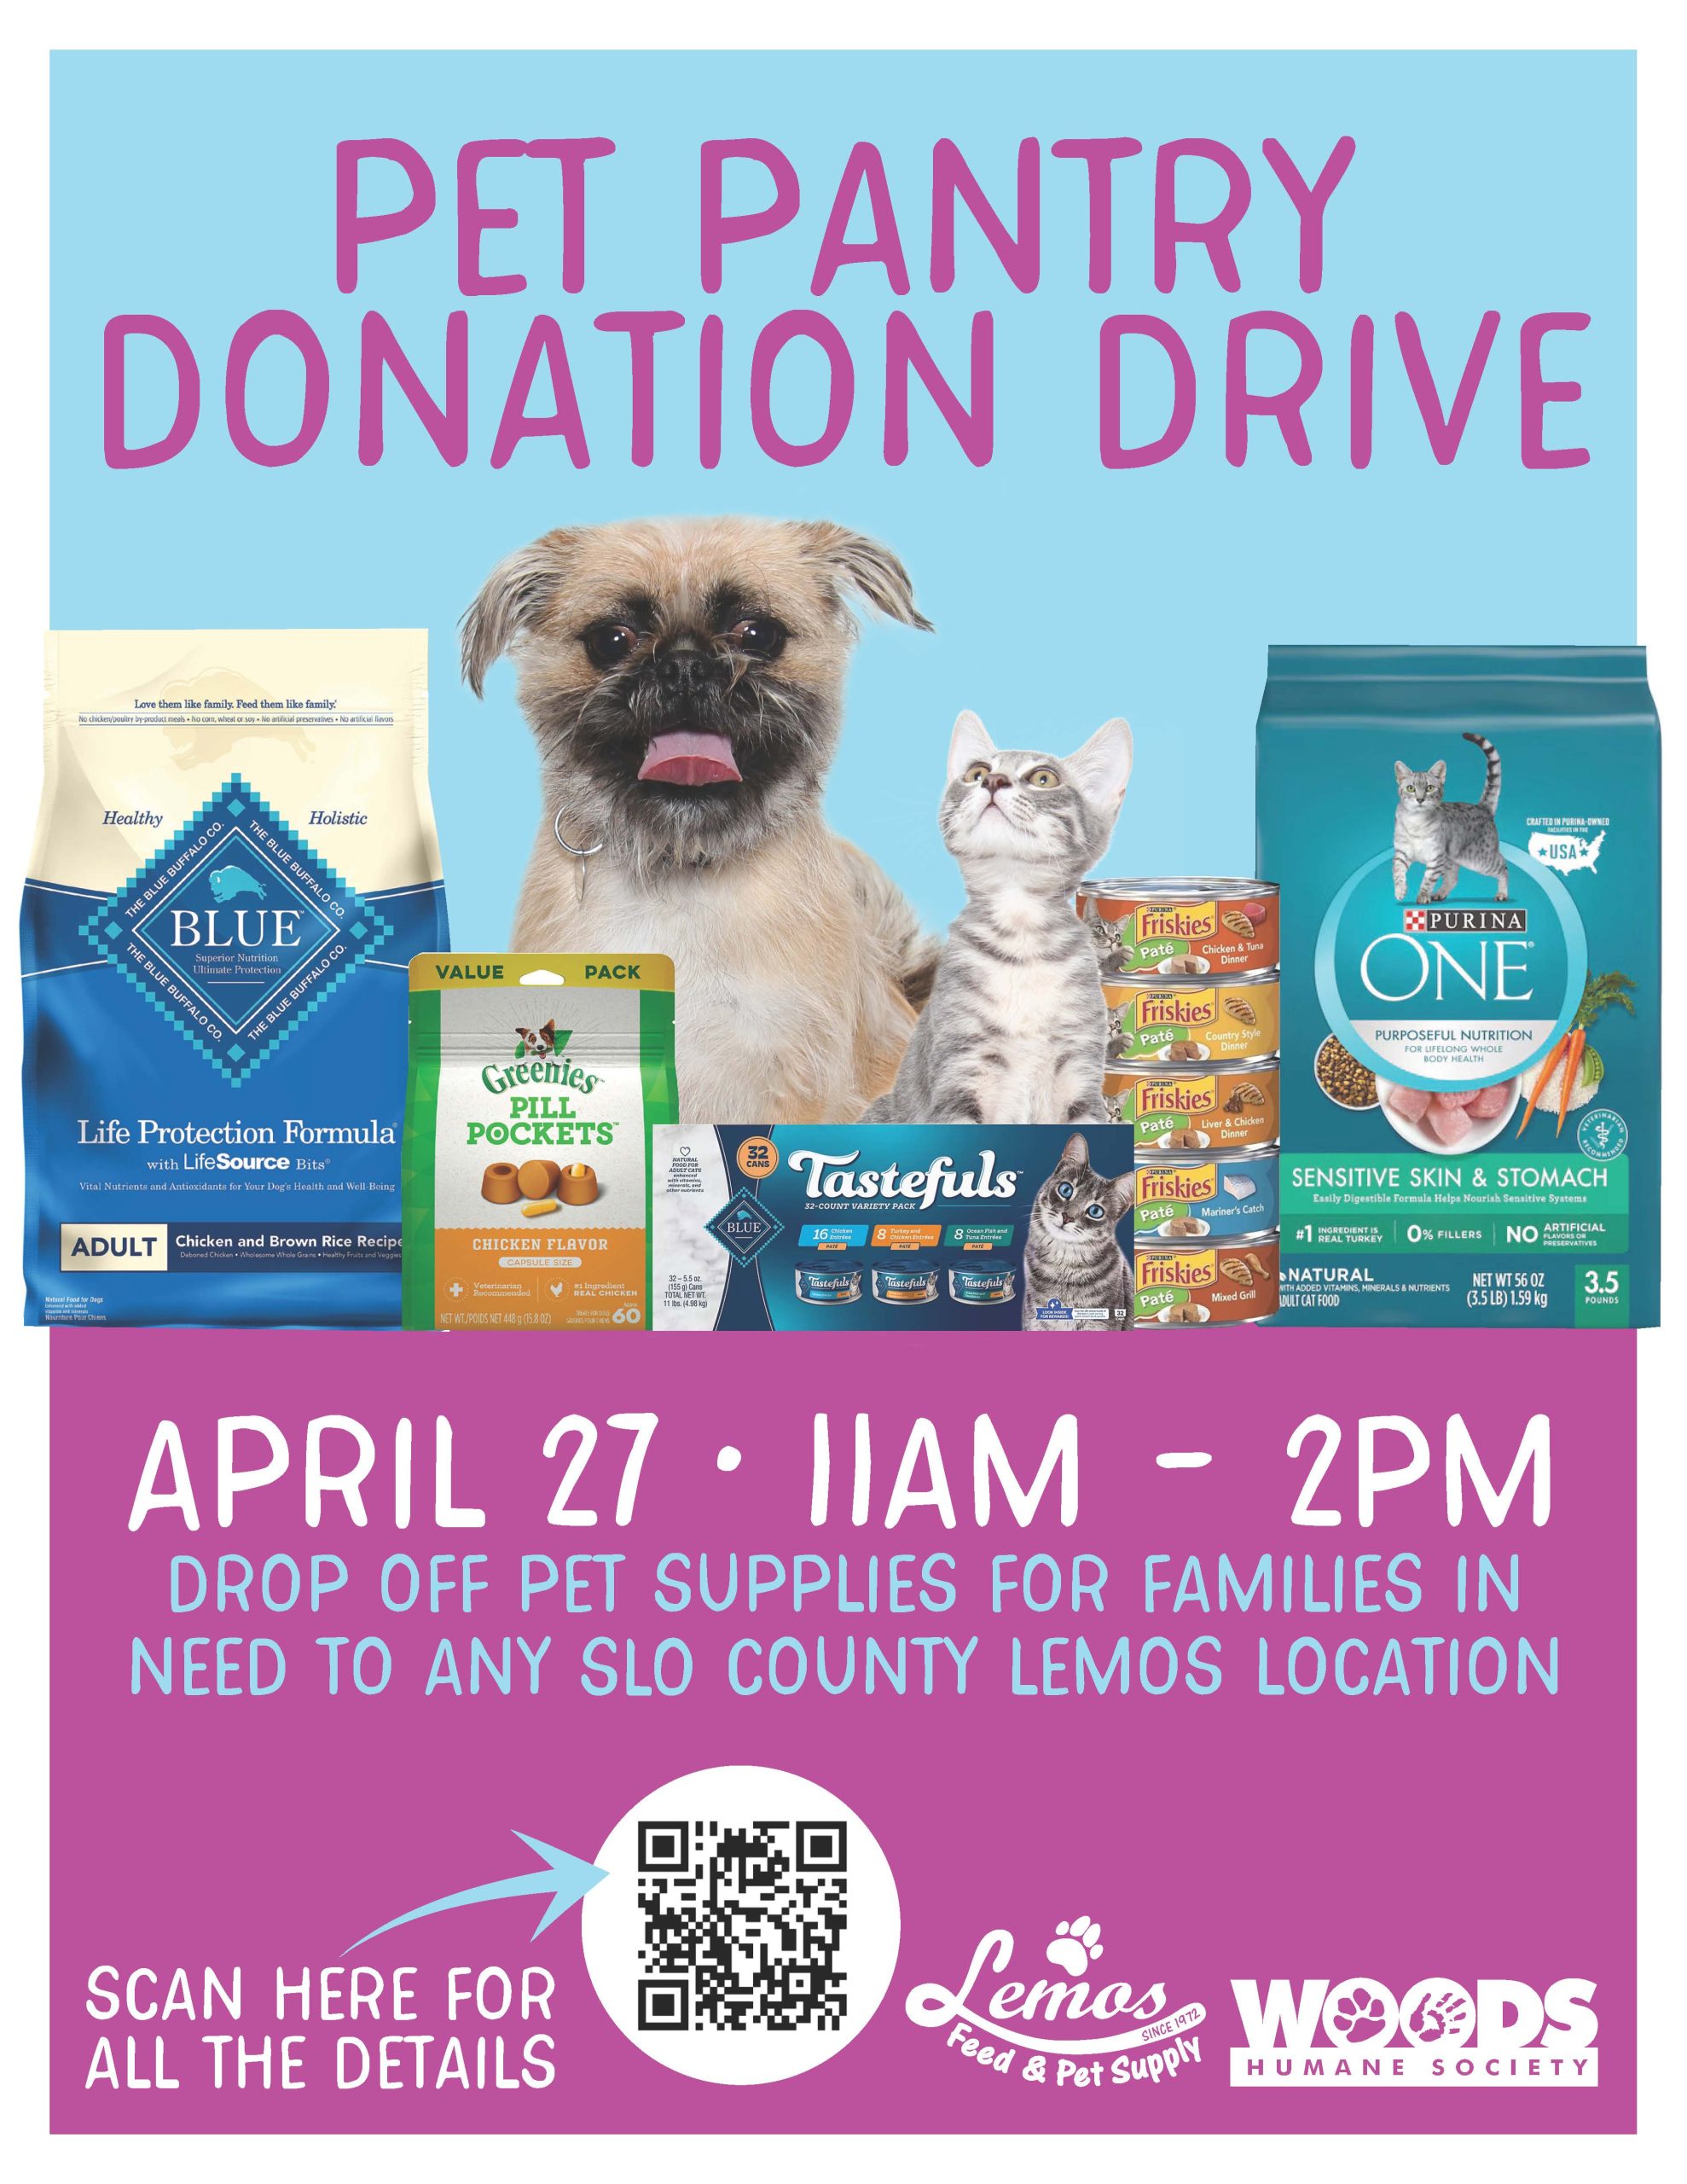 Donation drop off of dog food for pantry